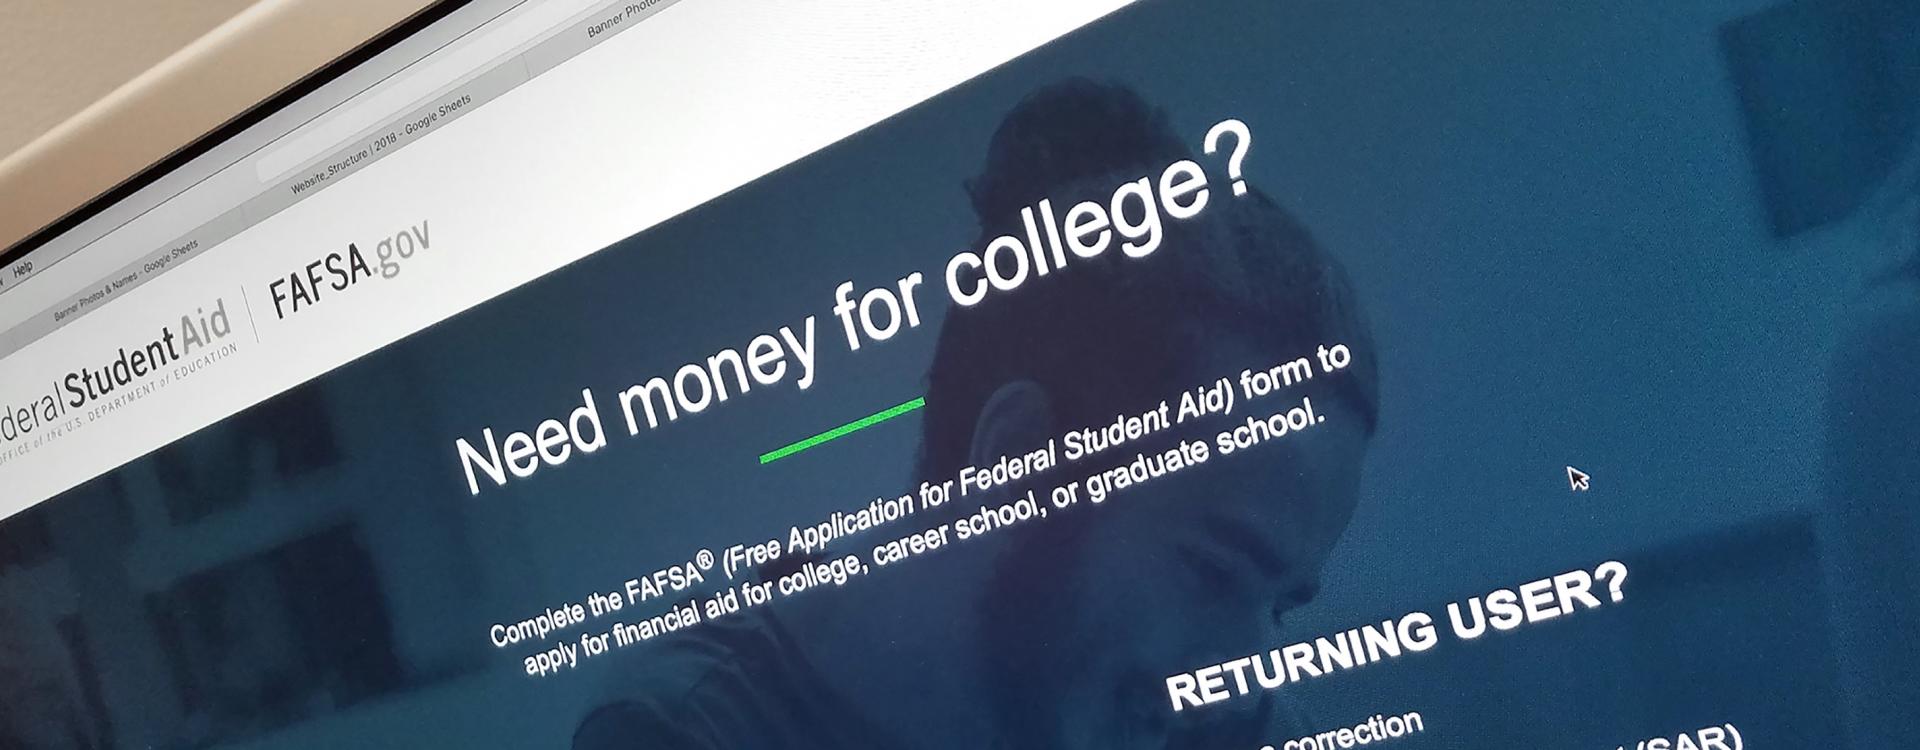 text on website that says need money for college?